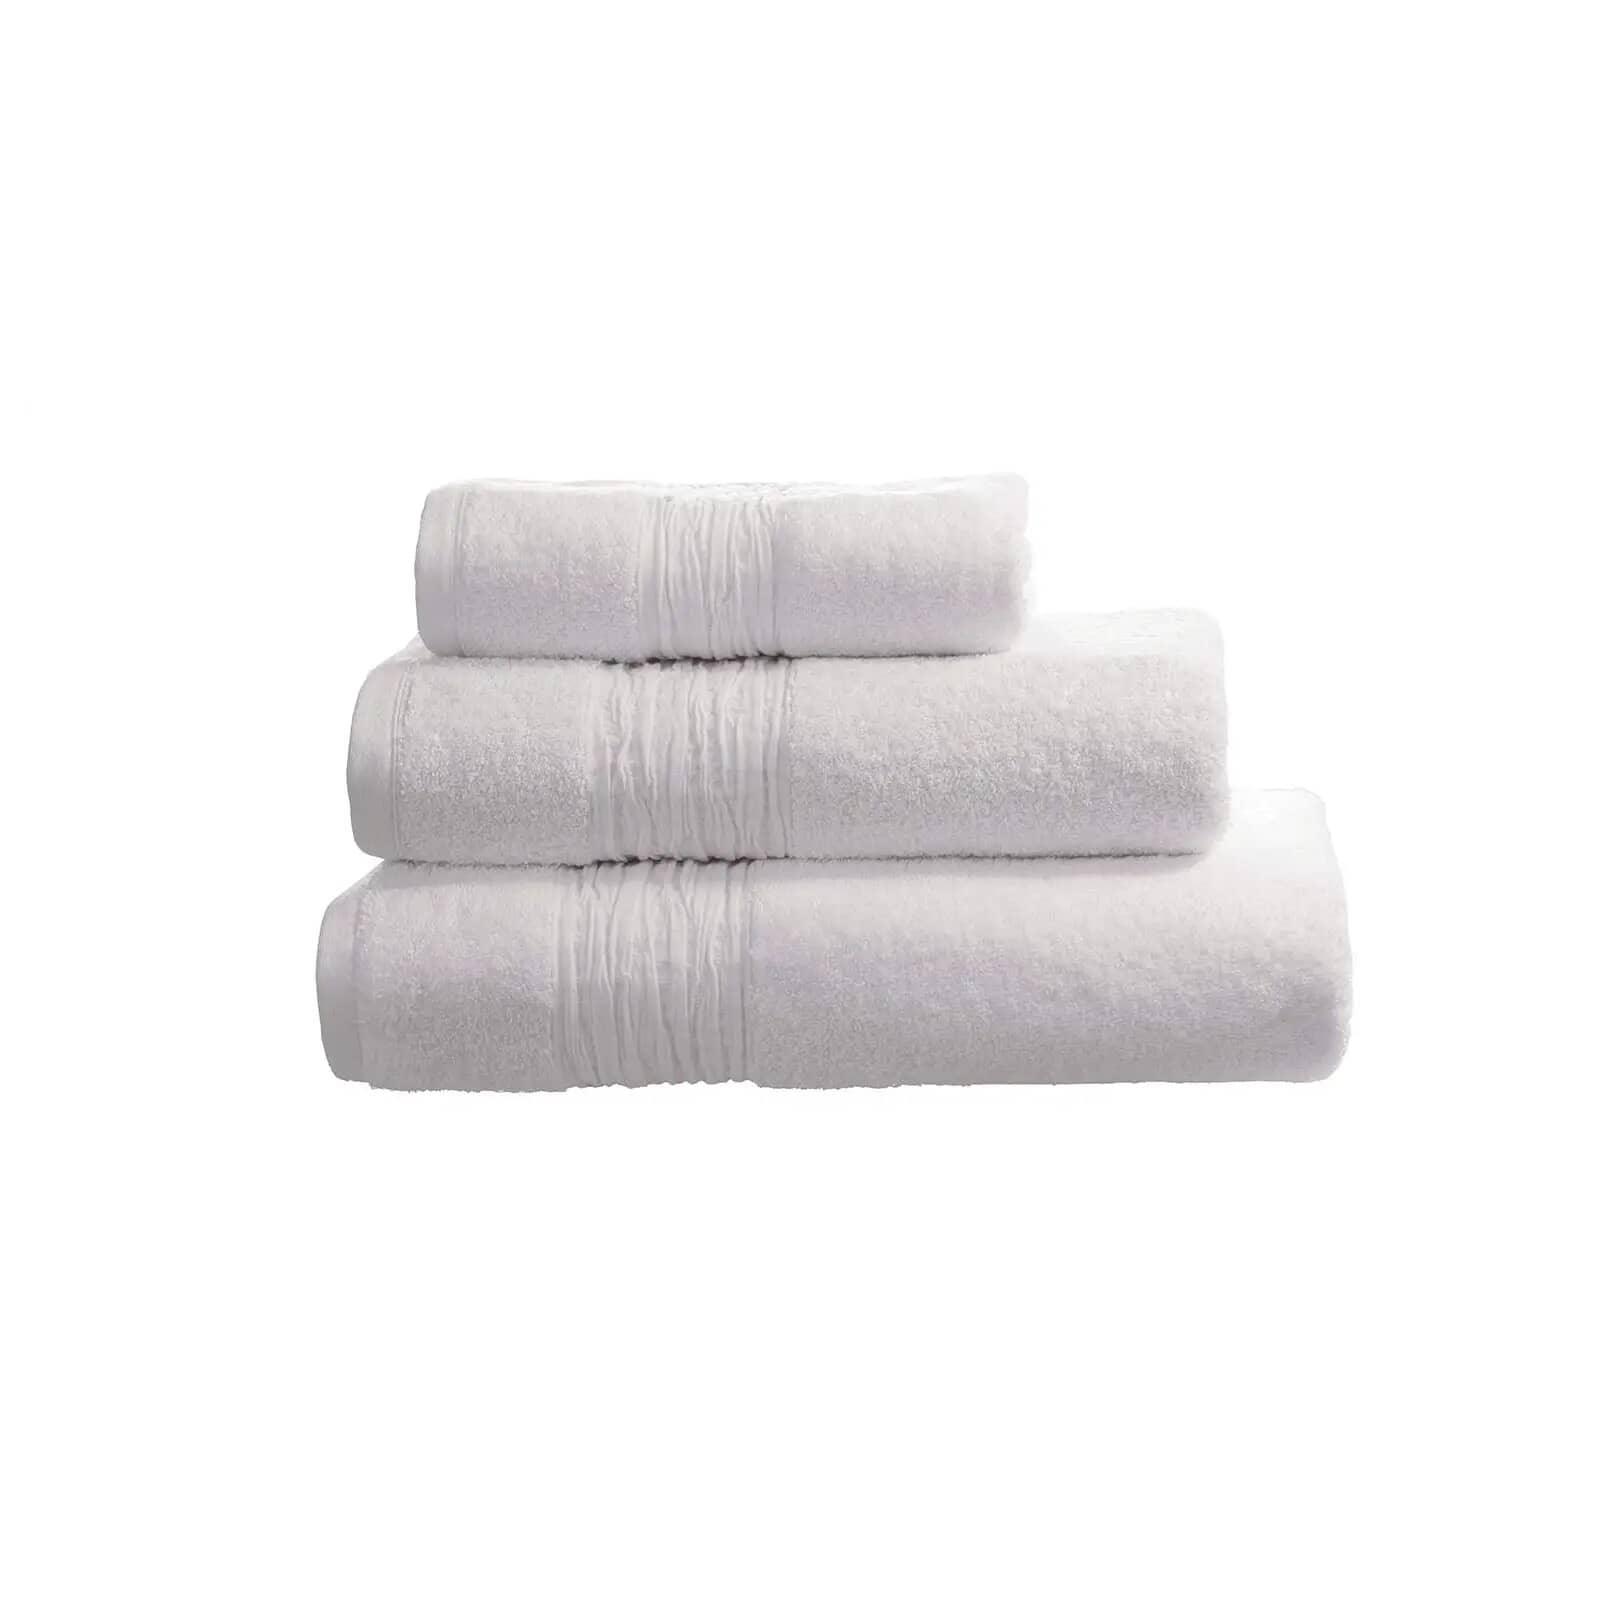 Towel With Linen Blend Insert Border White - RUTHERFORD & Co